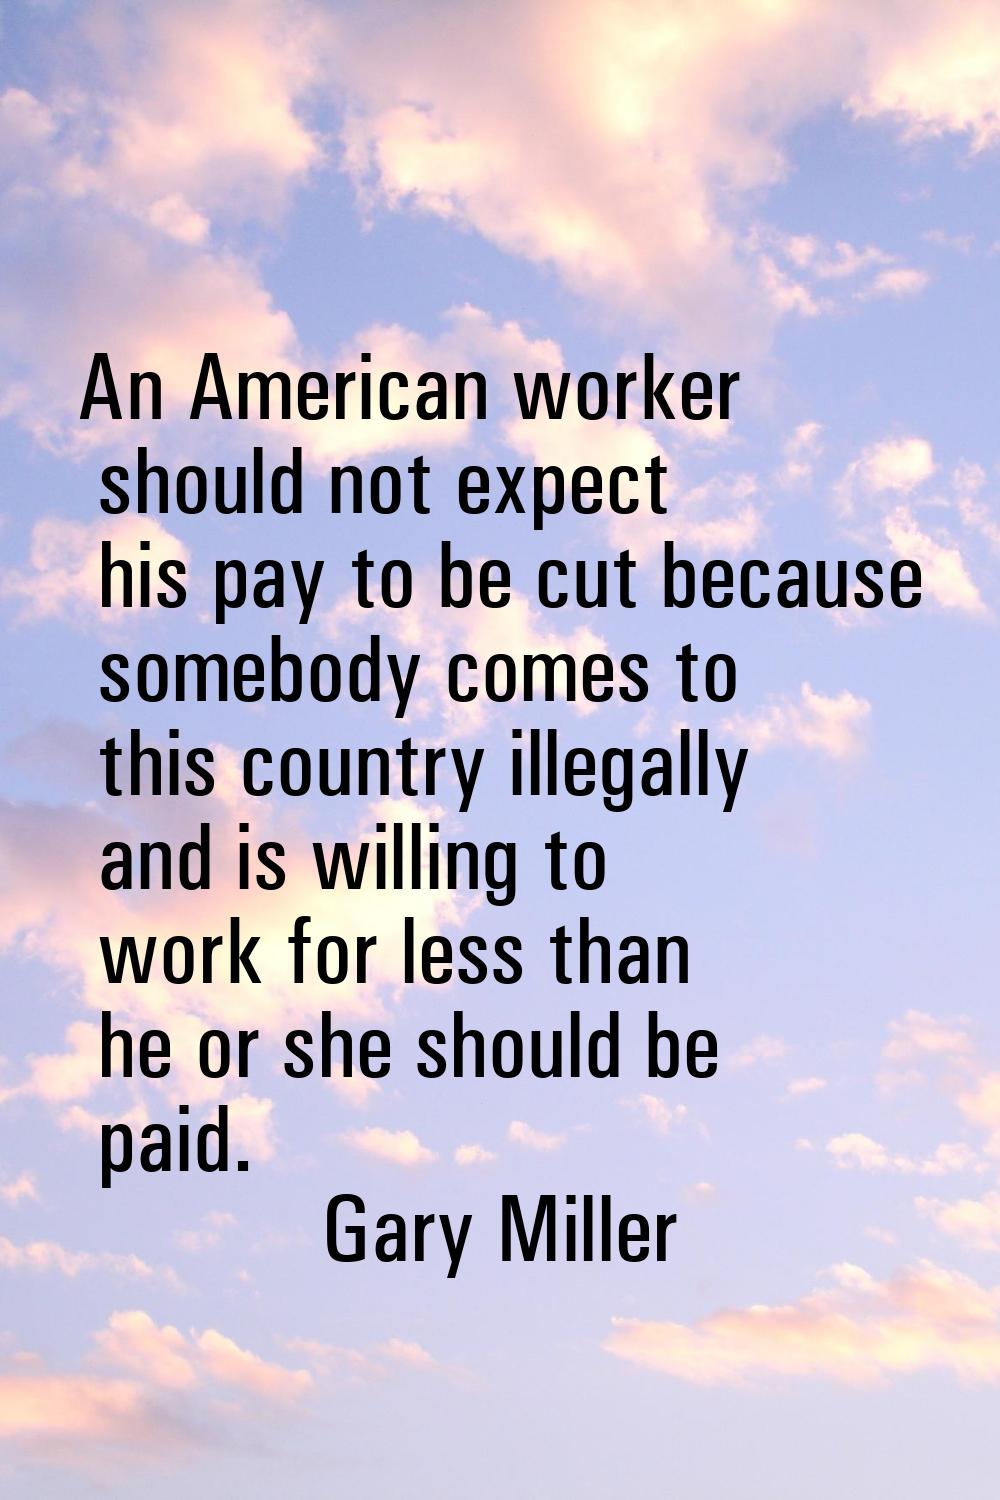 An American worker should not expect his pay to be cut because somebody comes to this country illeg